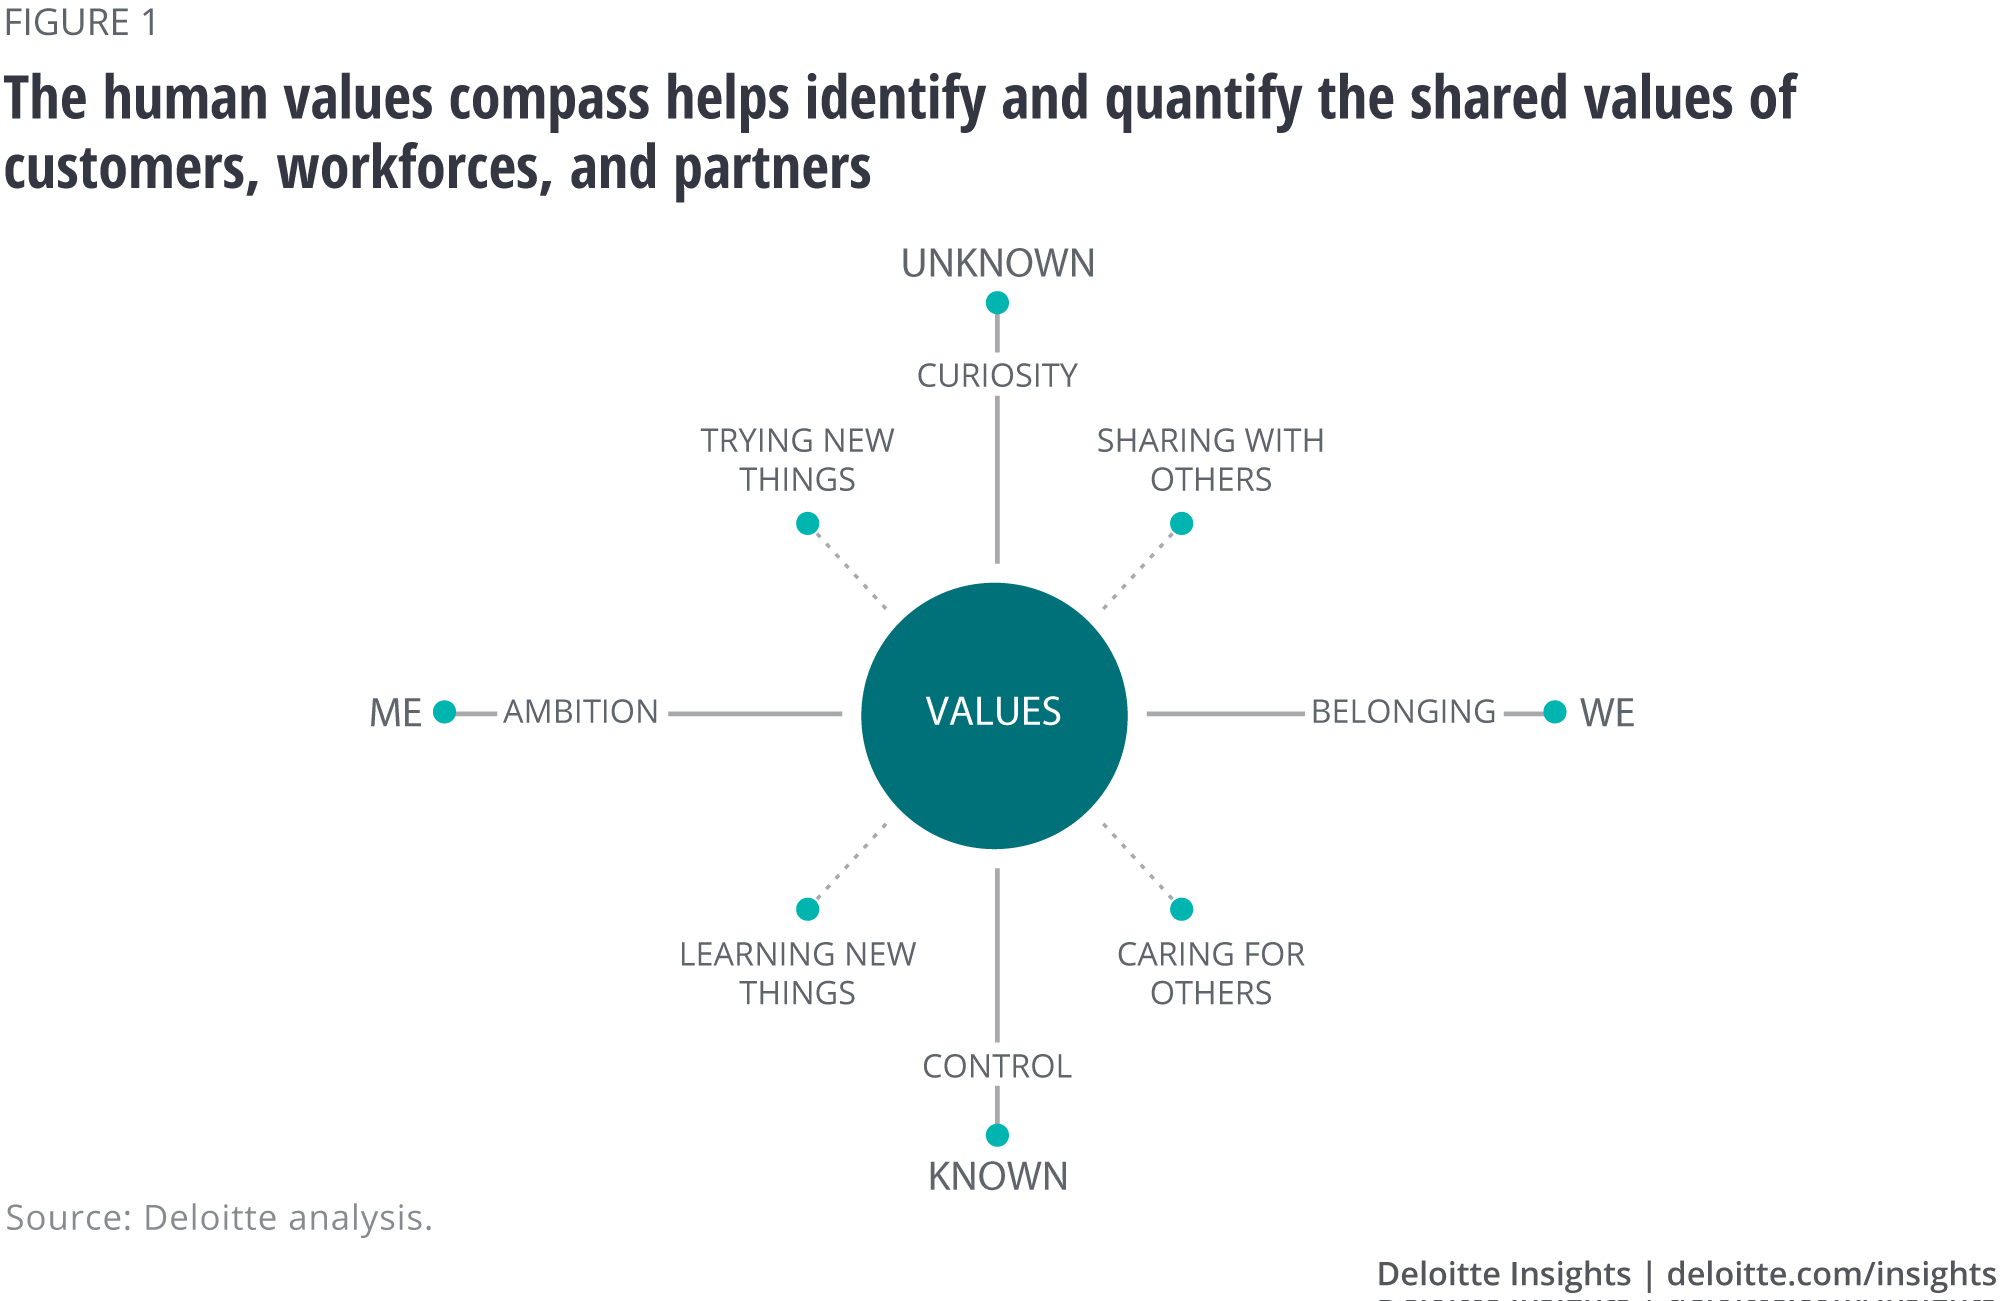 The human values compass helps identify and quantify the shared values of customers, workforces, and partners